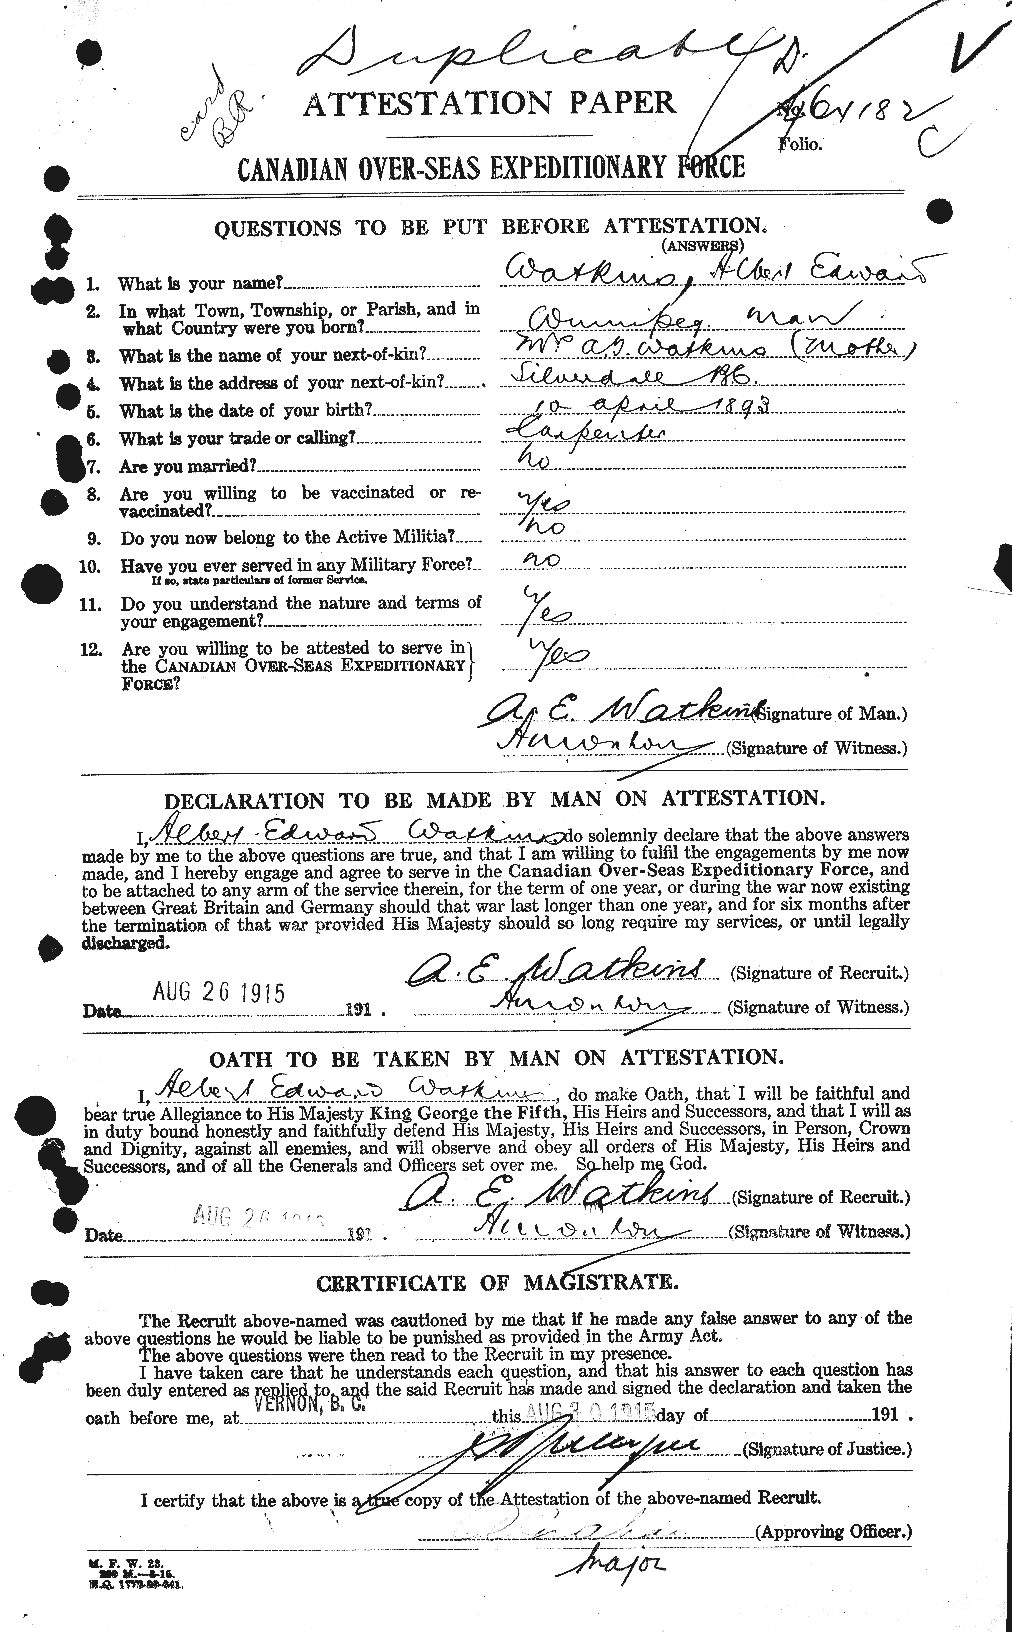 Personnel Records of the First World War - CEF 659150a